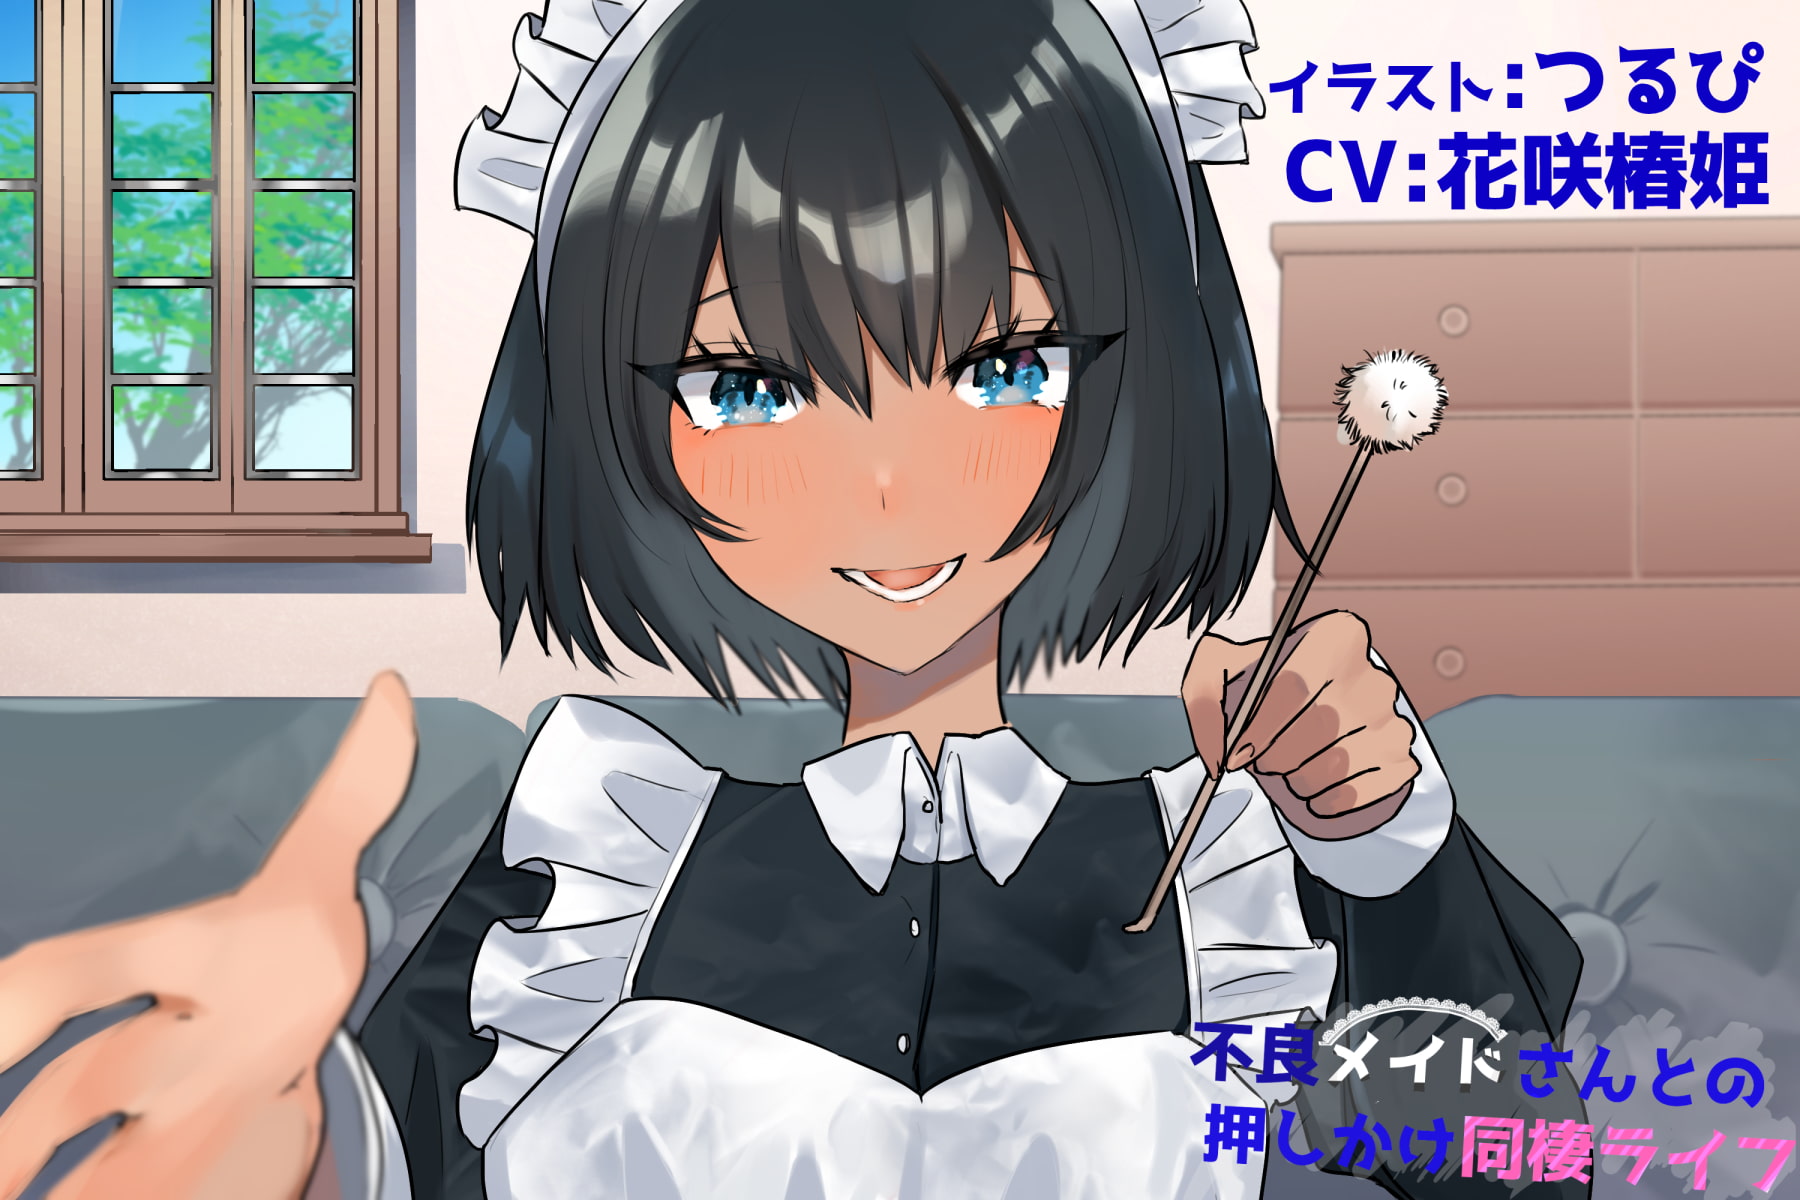 Living Together With a Bad Girl Maid